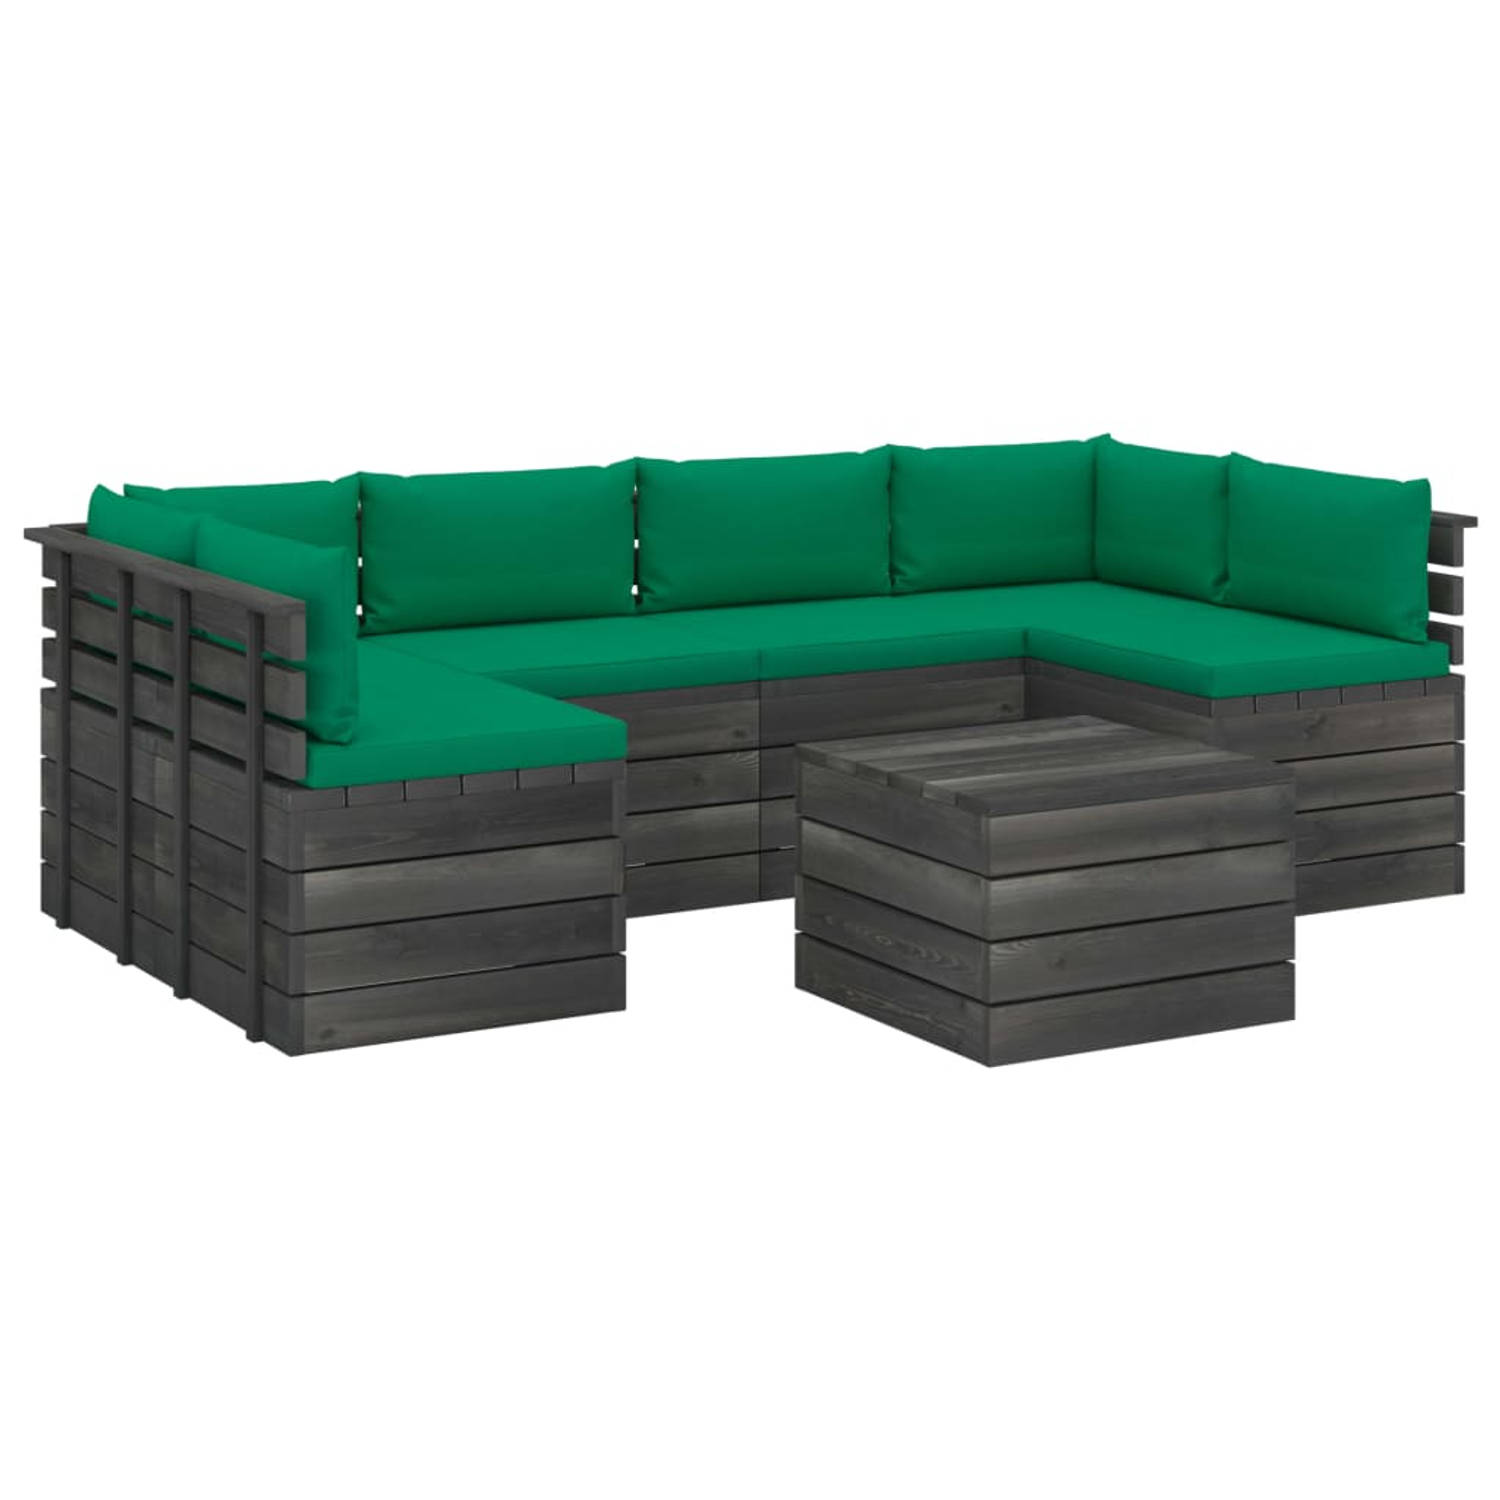 The Living Store Tuinset Pallet Lounge - 60x65x71.5 cm - Grenenhout - Groen kussen